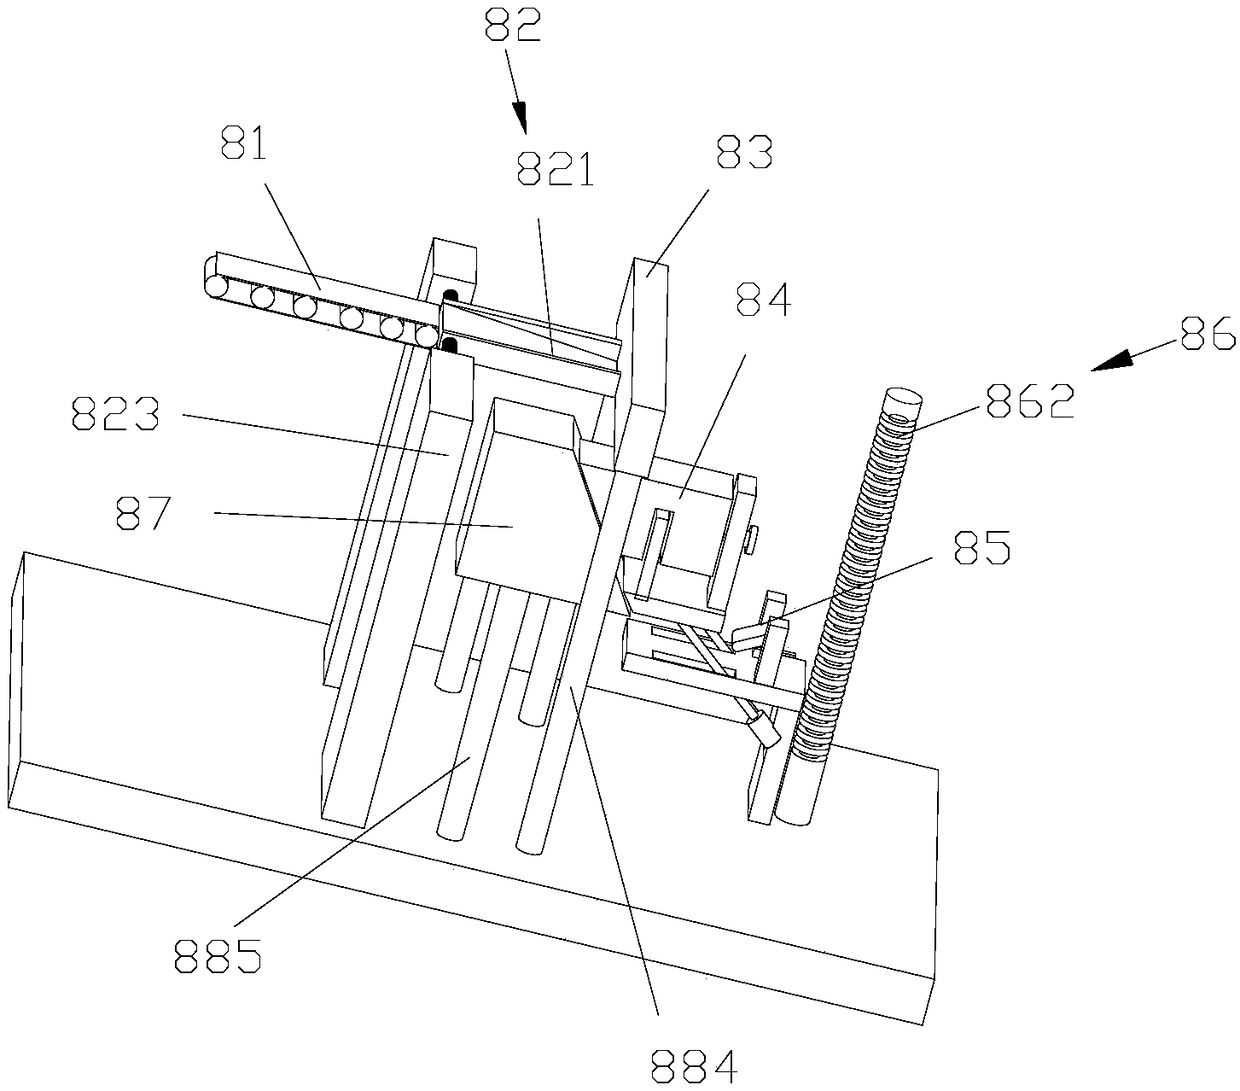 Operation device for mixed material